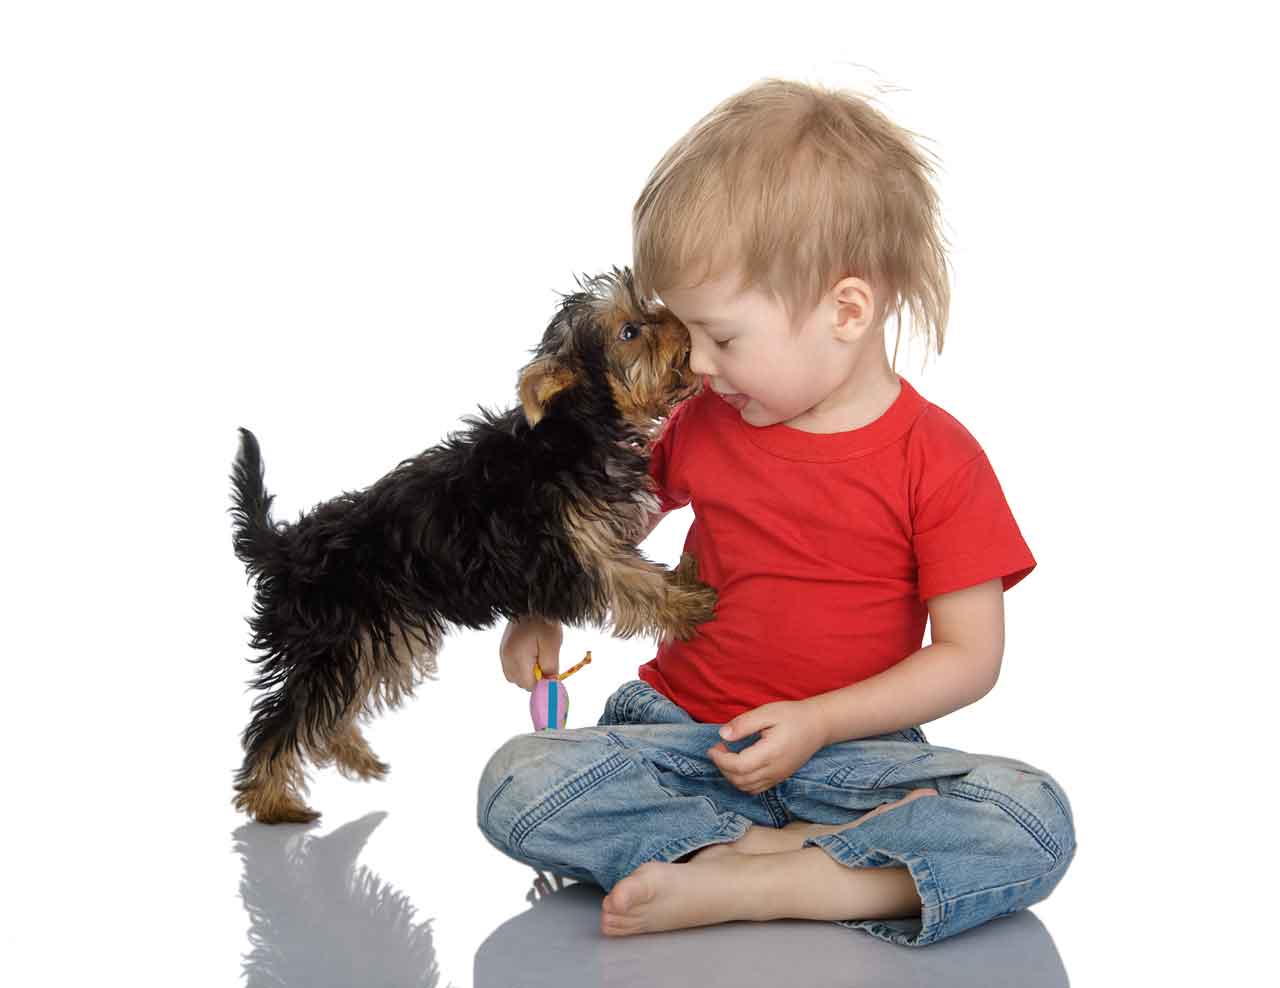 How yorkies show affection. Yorkie giving a little boy a kiss.